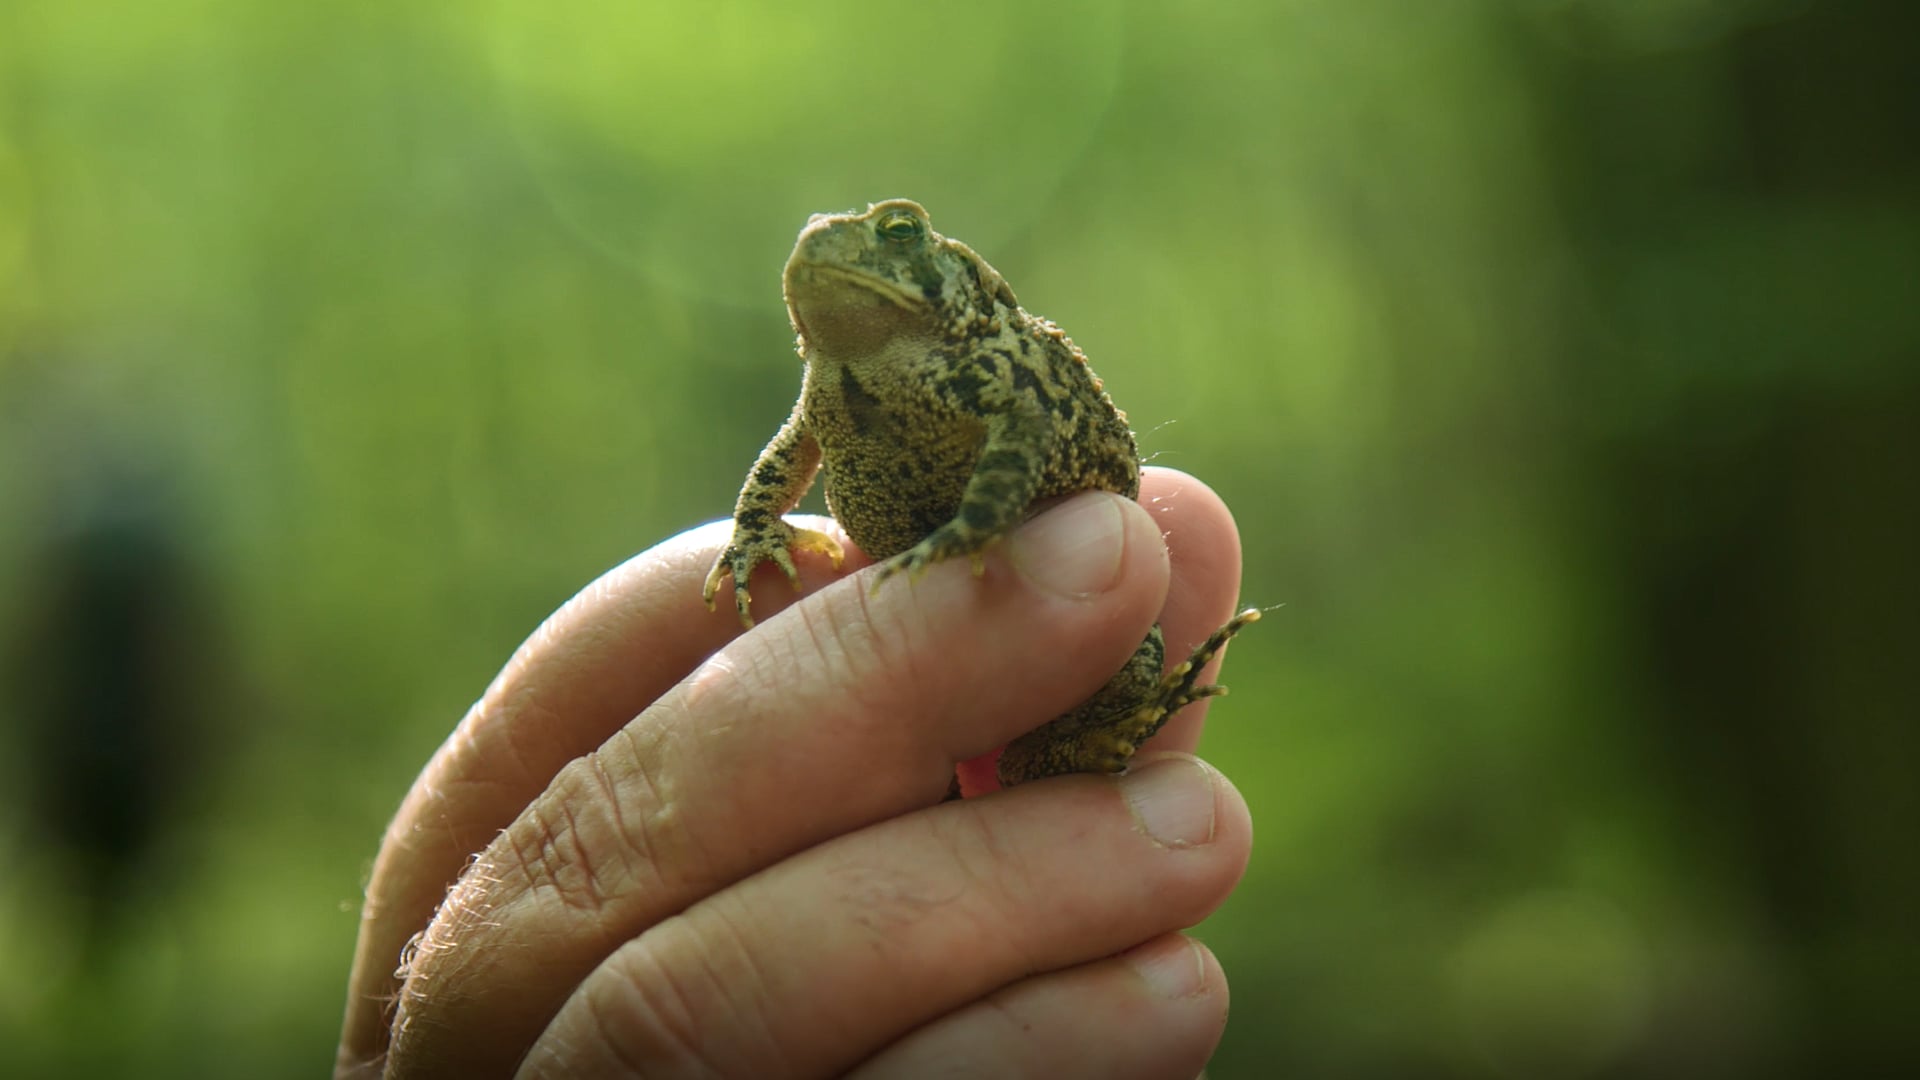 Dr. Bob Talks Frogs, Amphibians, and Outreach